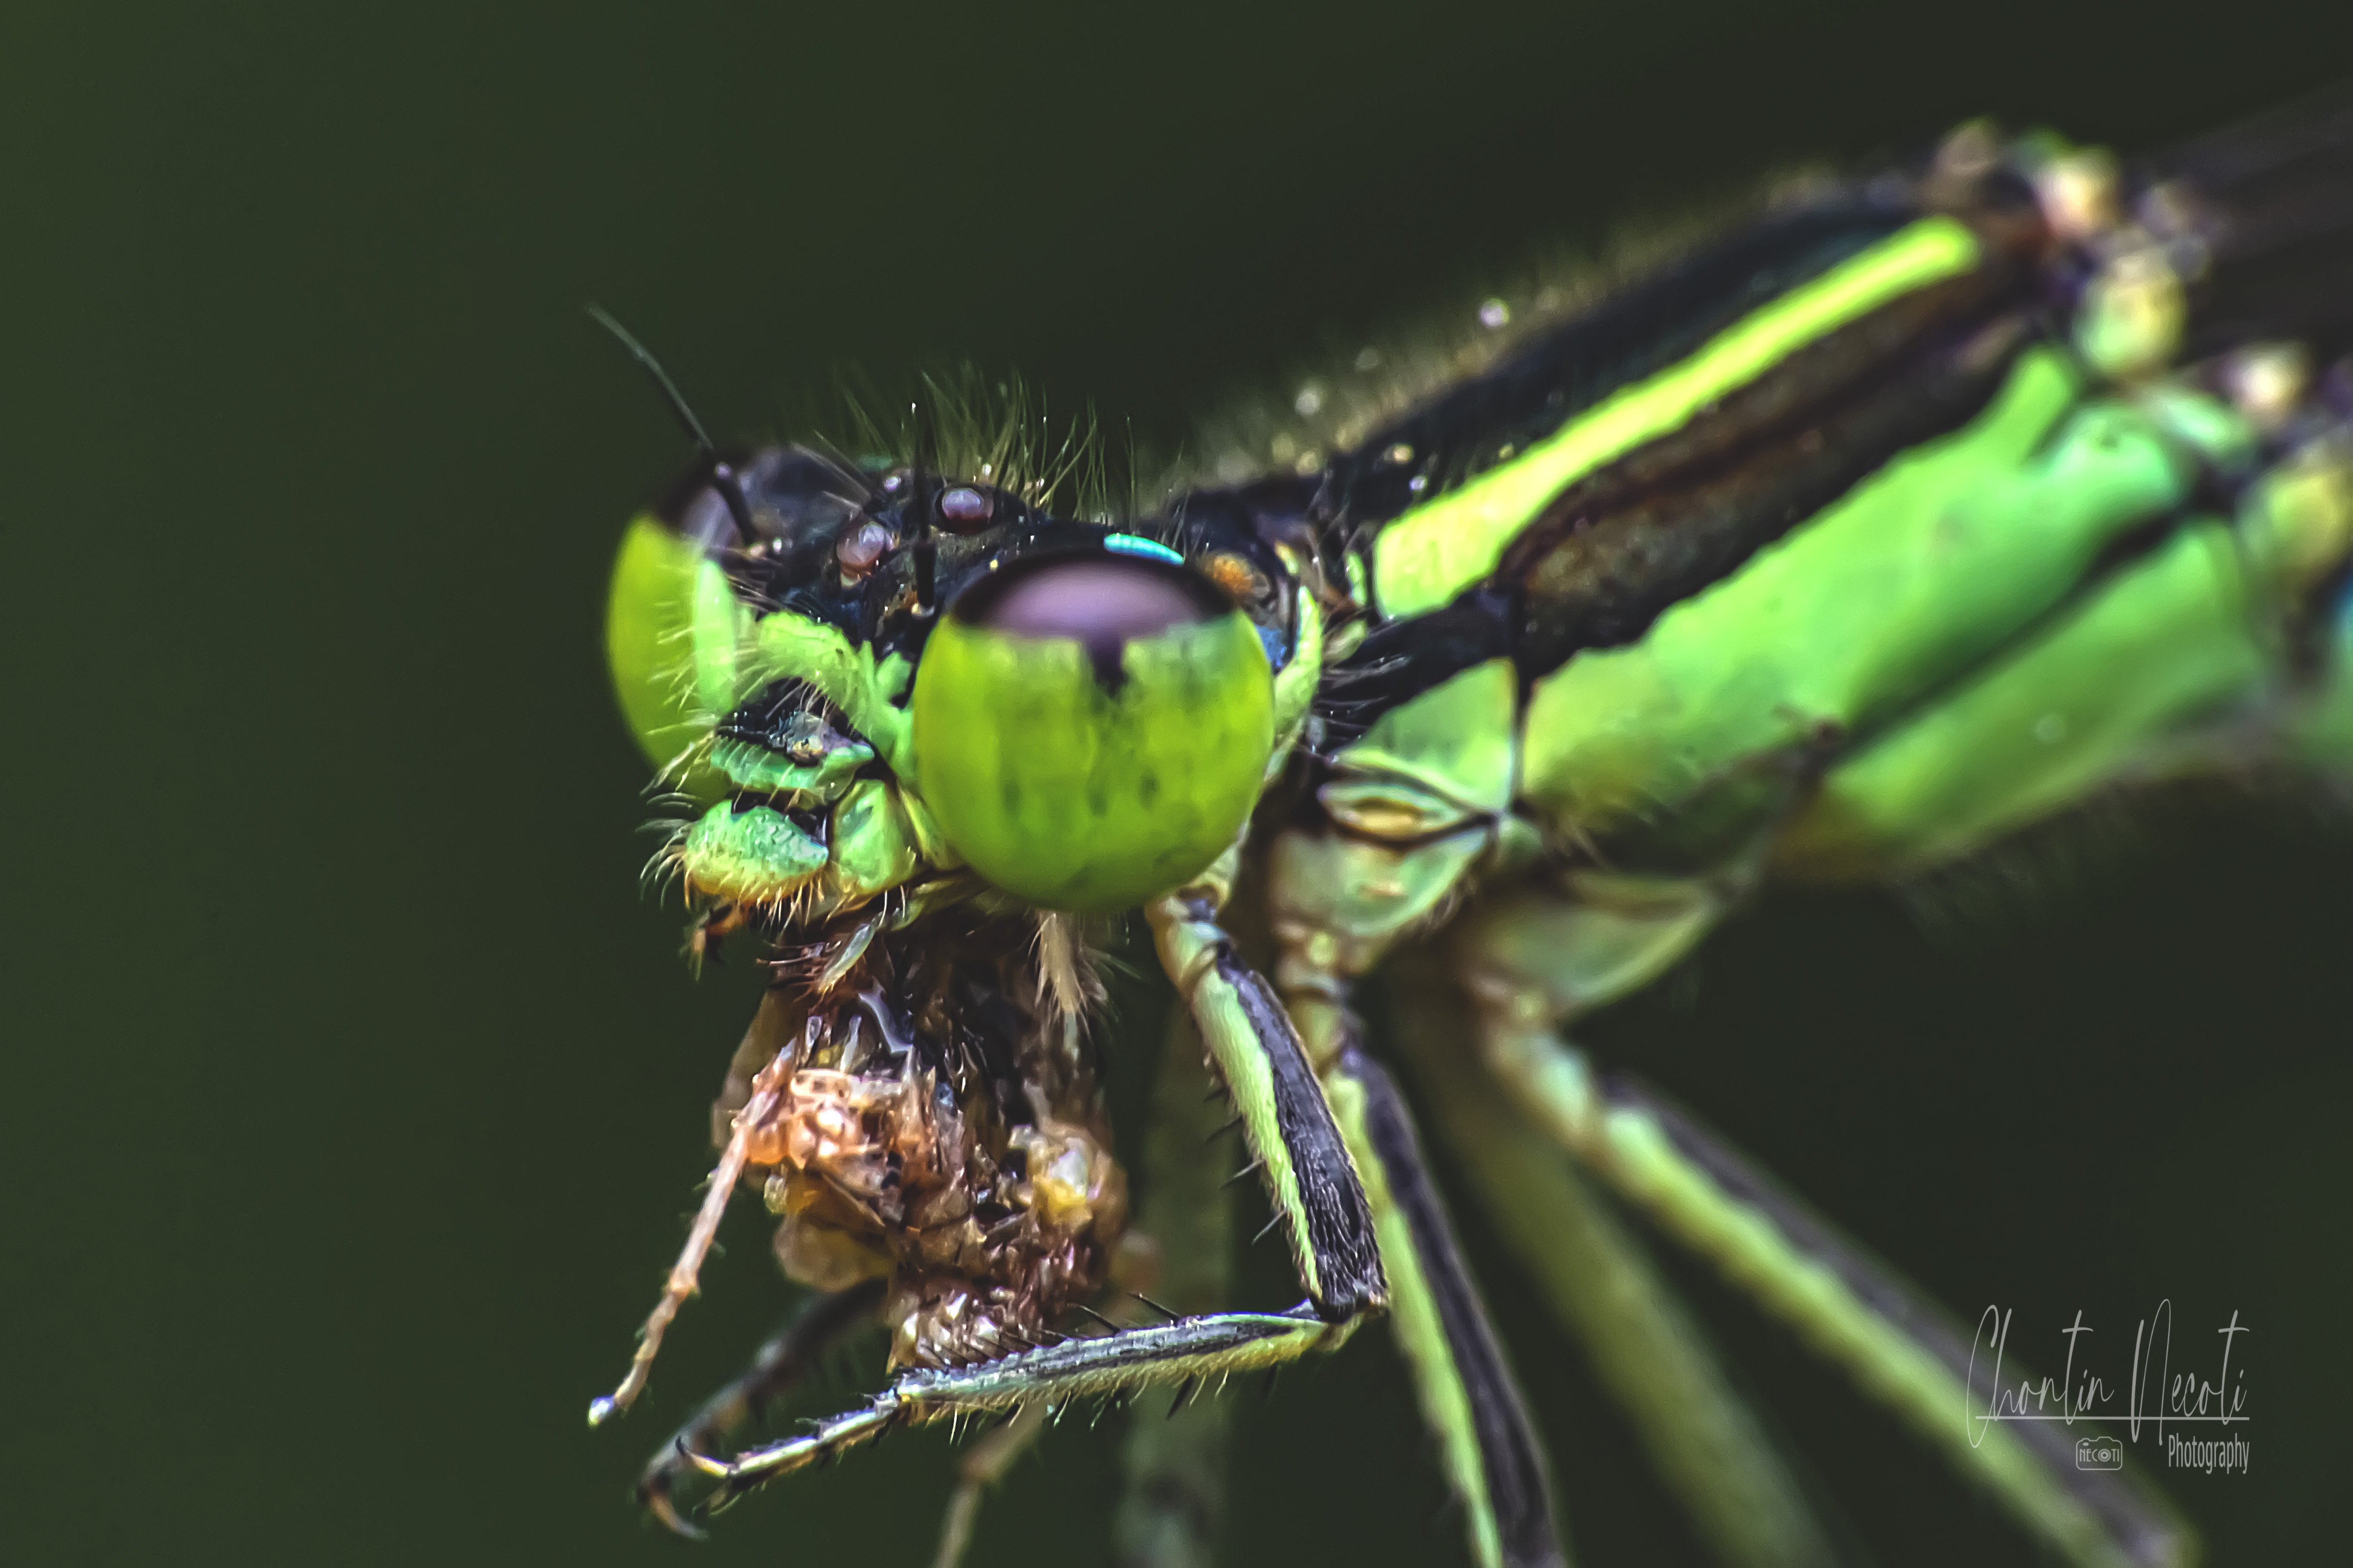 dragonfly, fly, grass, eating, green, garden, insect, macro, close up, stock, image, photo, nature, natural, outdoor, fresh, NeCoTi ChonTin